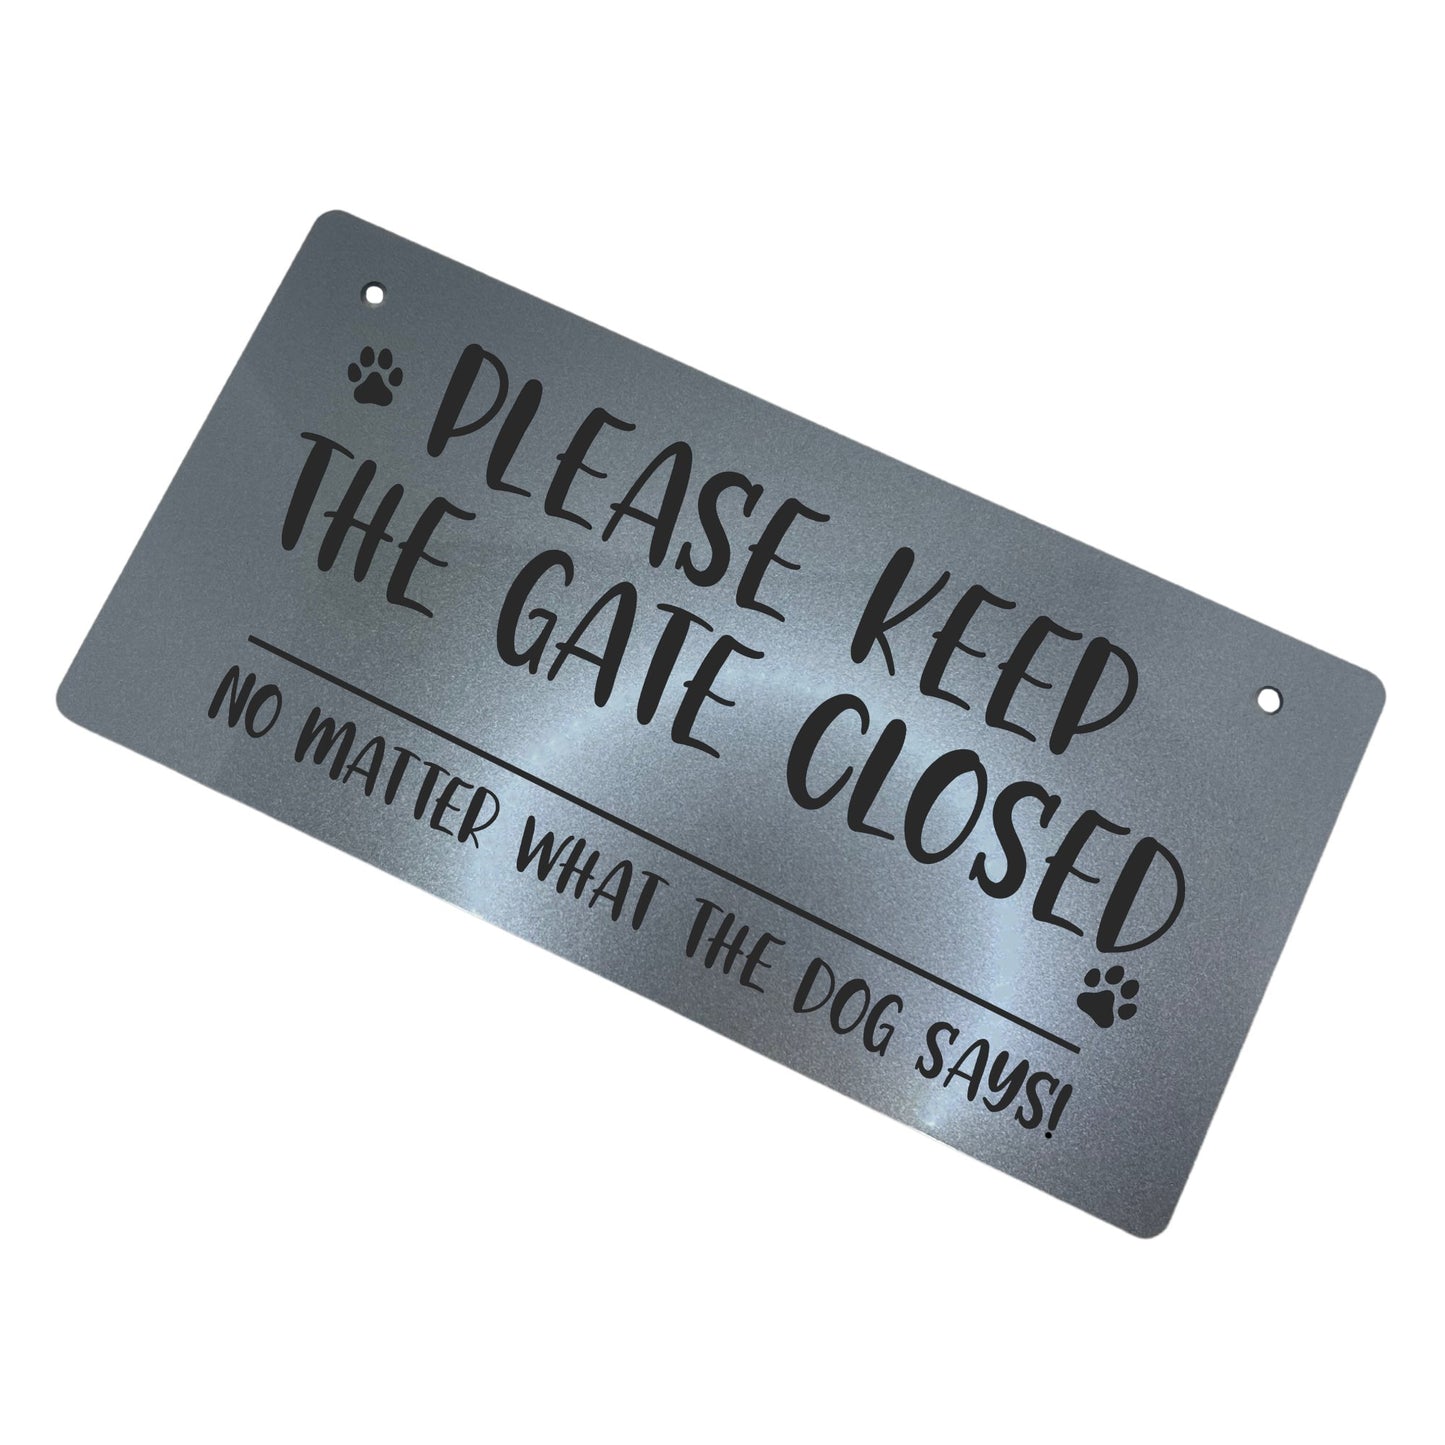 "Weatherproof and Fade-Resistant 'Please Keep the Gate Closed' Sign" Description: An outdoor view of the sign, highlighting its weatherproof and fade-resistant features. The laser-engraved text and paw print design remain intact, even in harsh weather conditions.